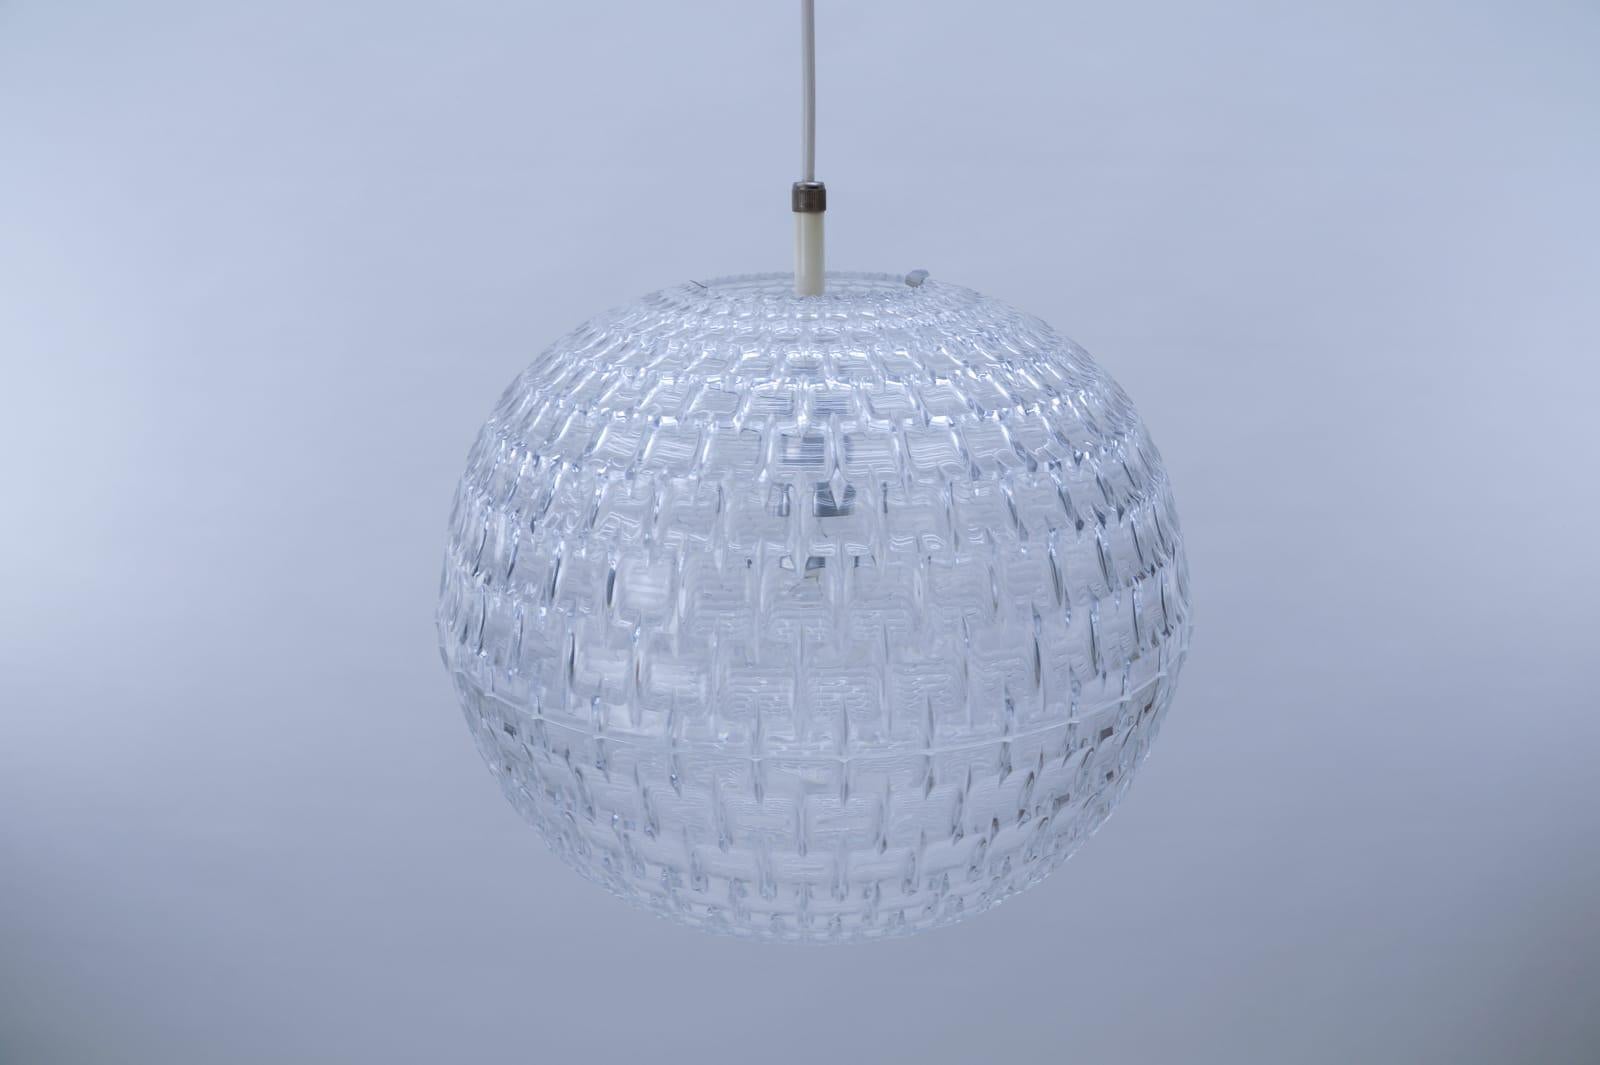 Metal Clear Acrylic Pendant Lamp by Aloys F. Gangkofner for Erco Leuchten, 1960s For Sale